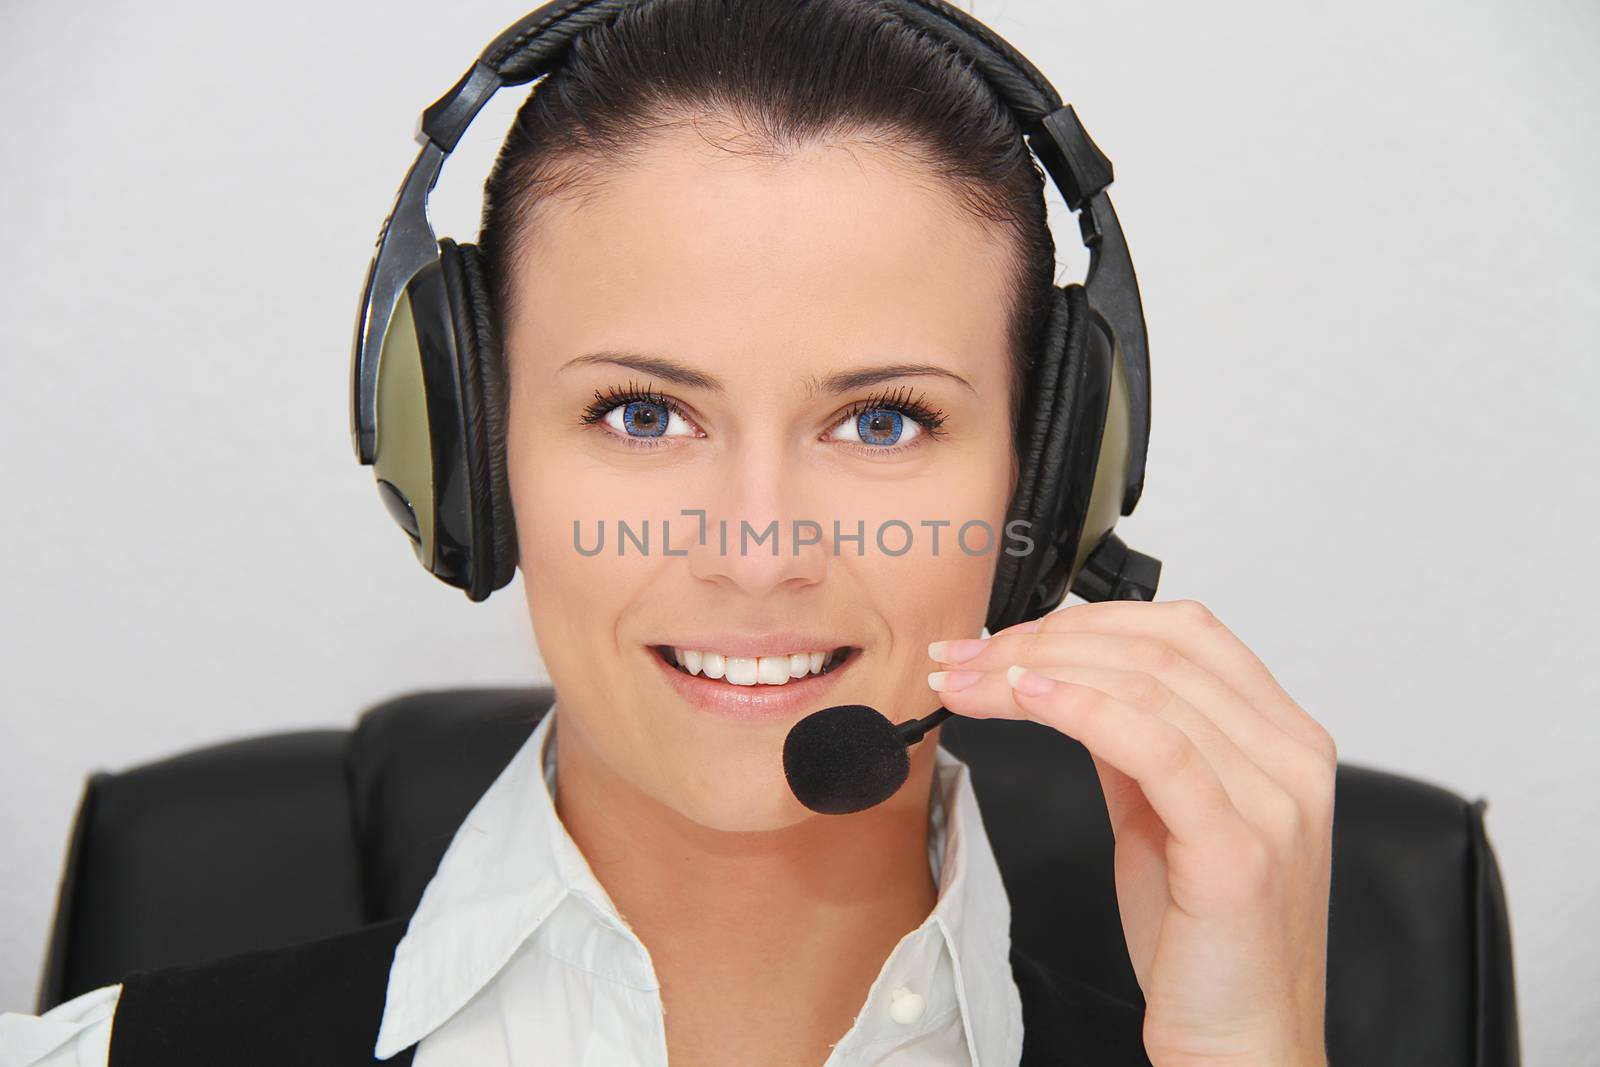 Female customer support operator with headset by mirzavis